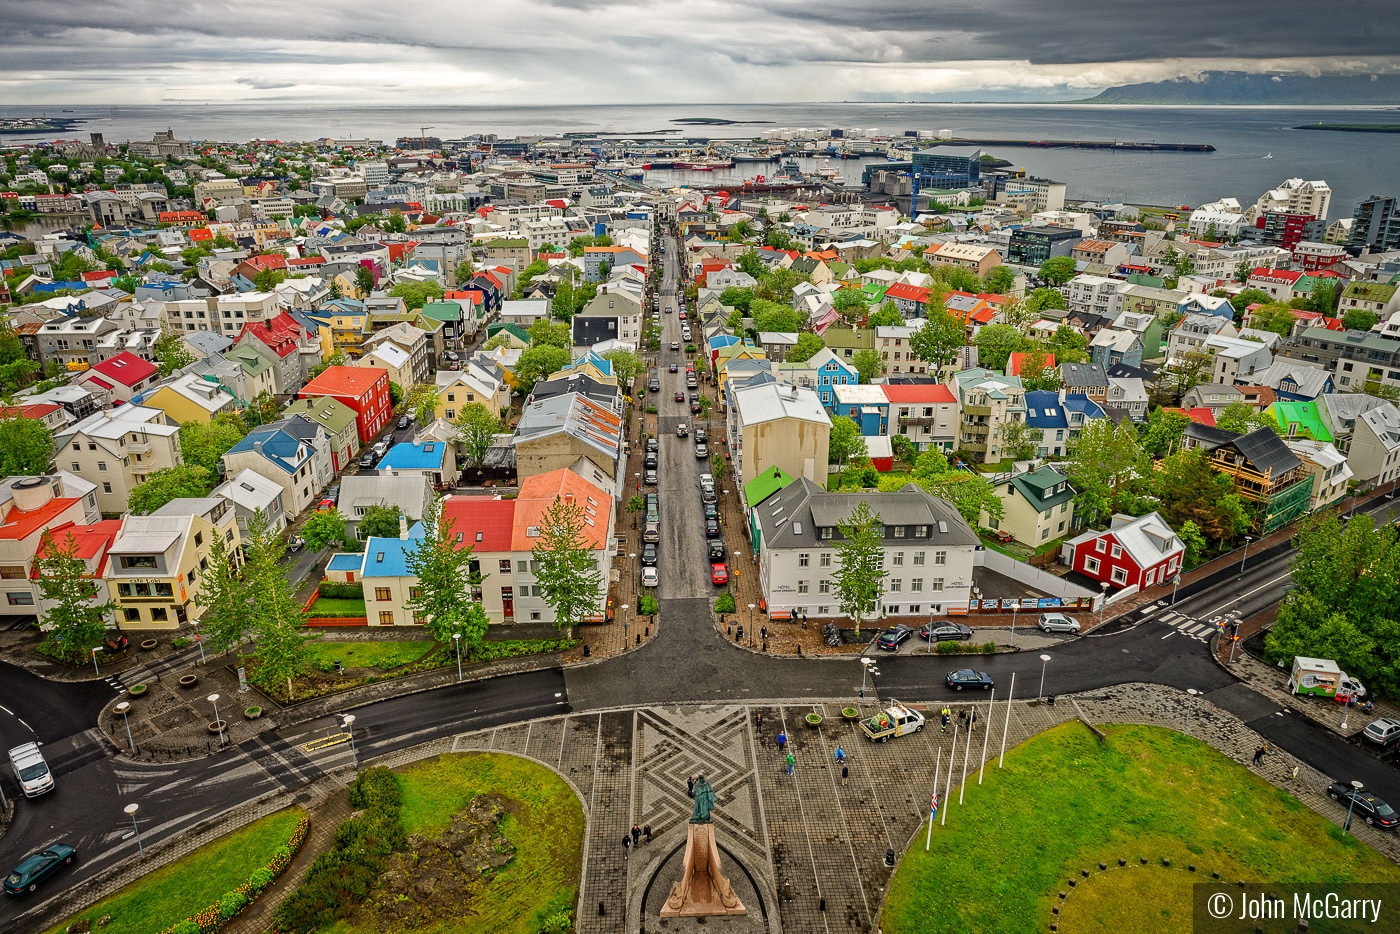 View of Reykjavik from the Church Tower by John McGarry